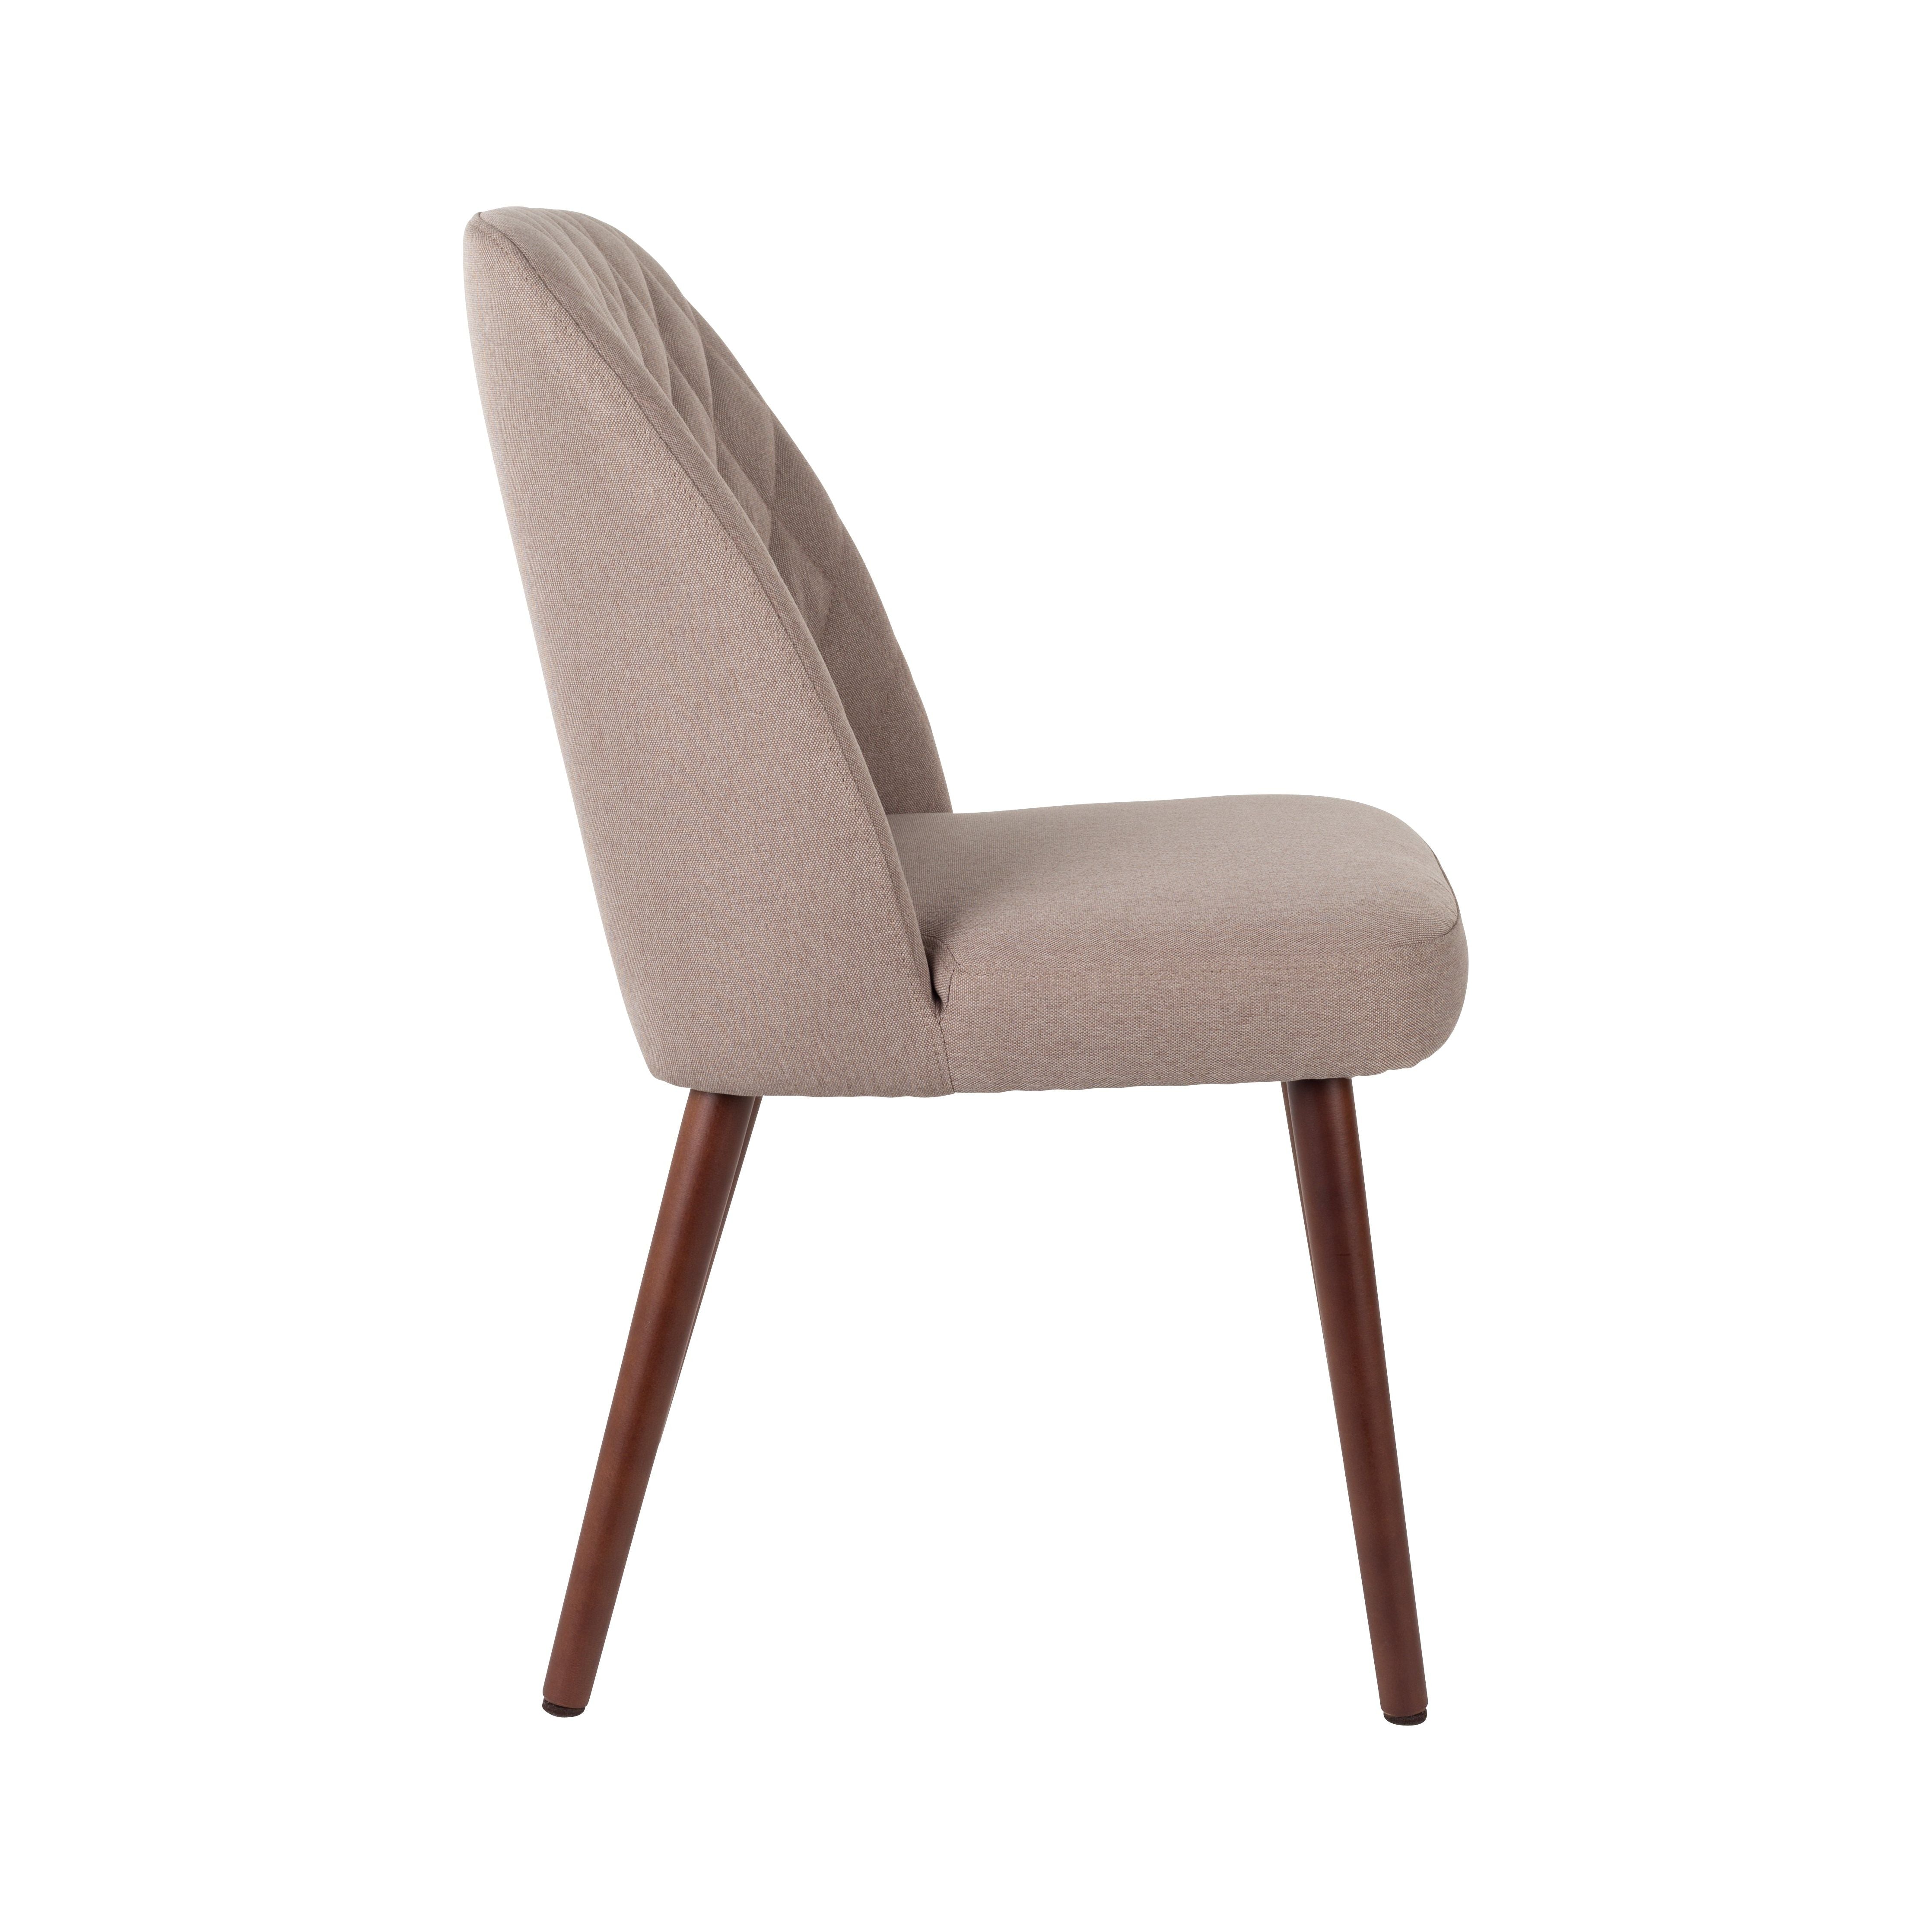 Chair conway beige | 2 pieces